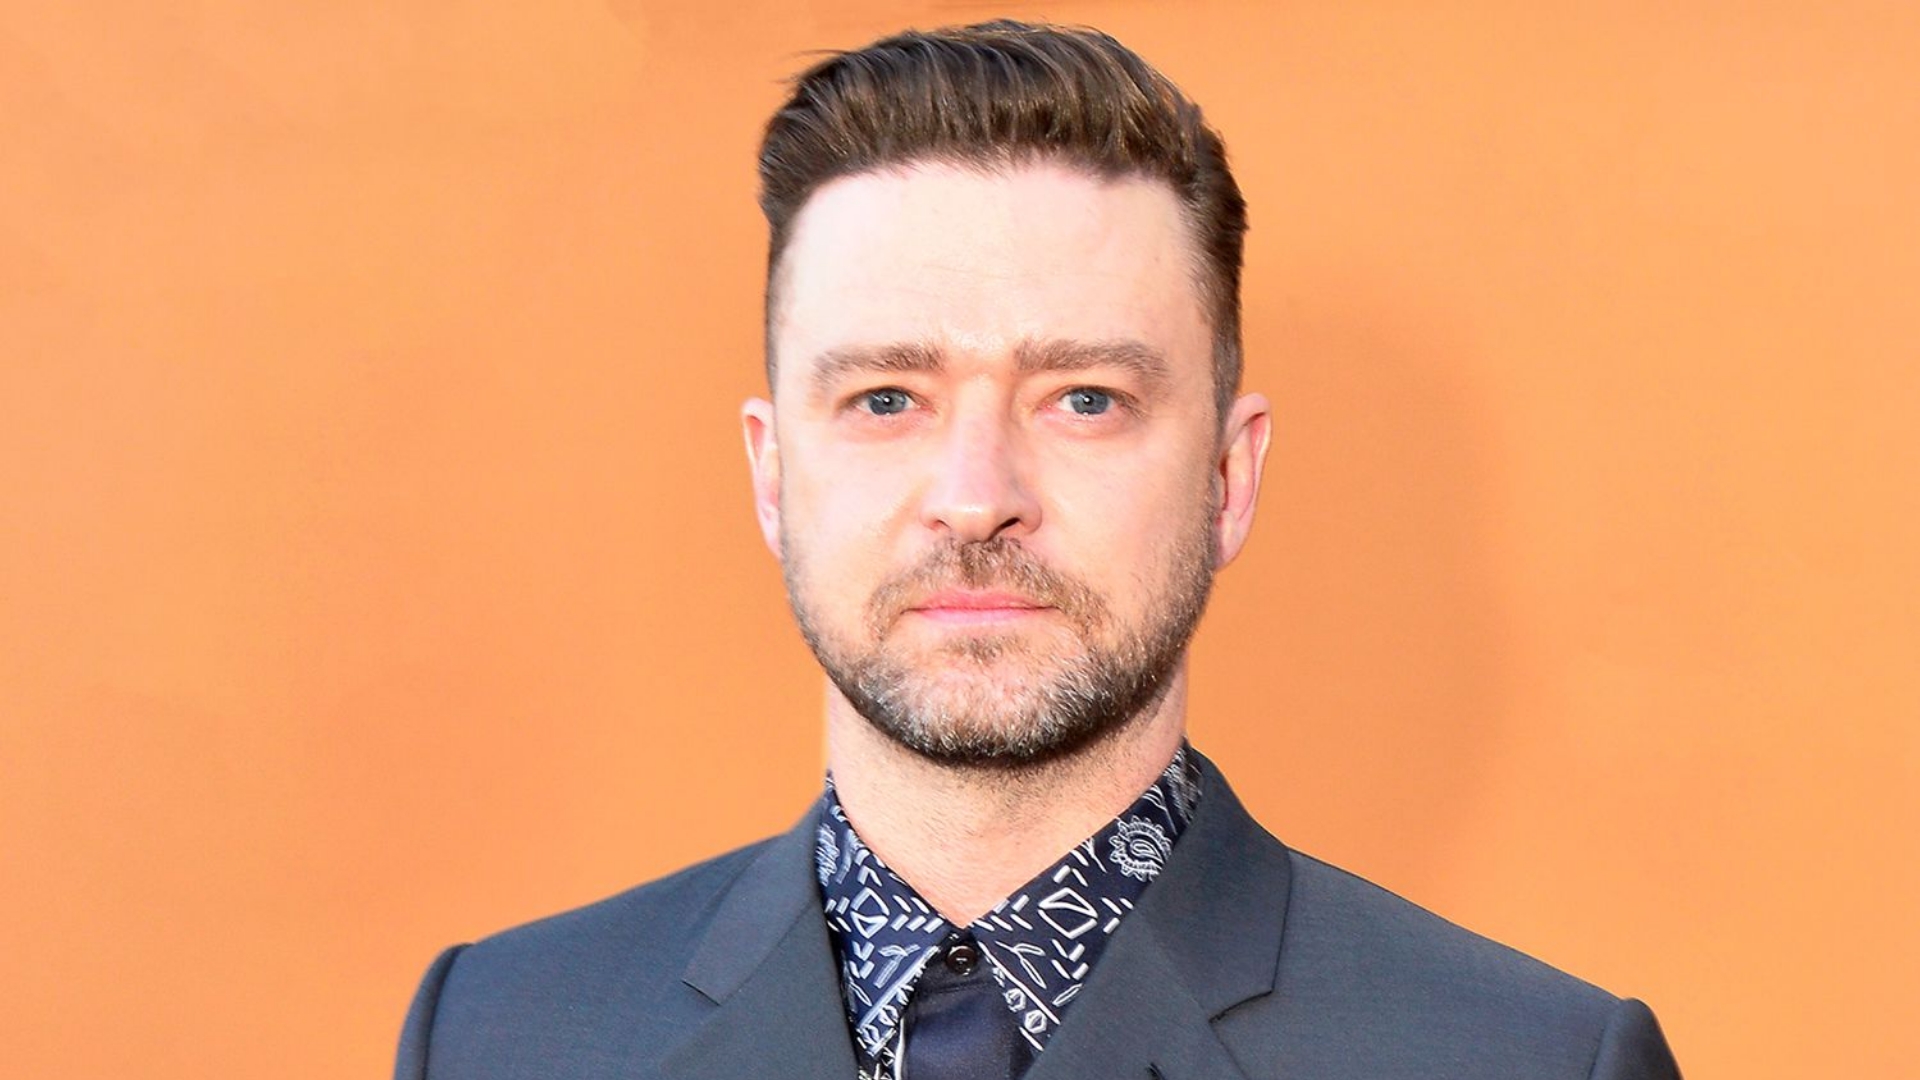 "I had one martini," Justin Timberlake said to police after being arrested in Hamptons on a DWI allegation.